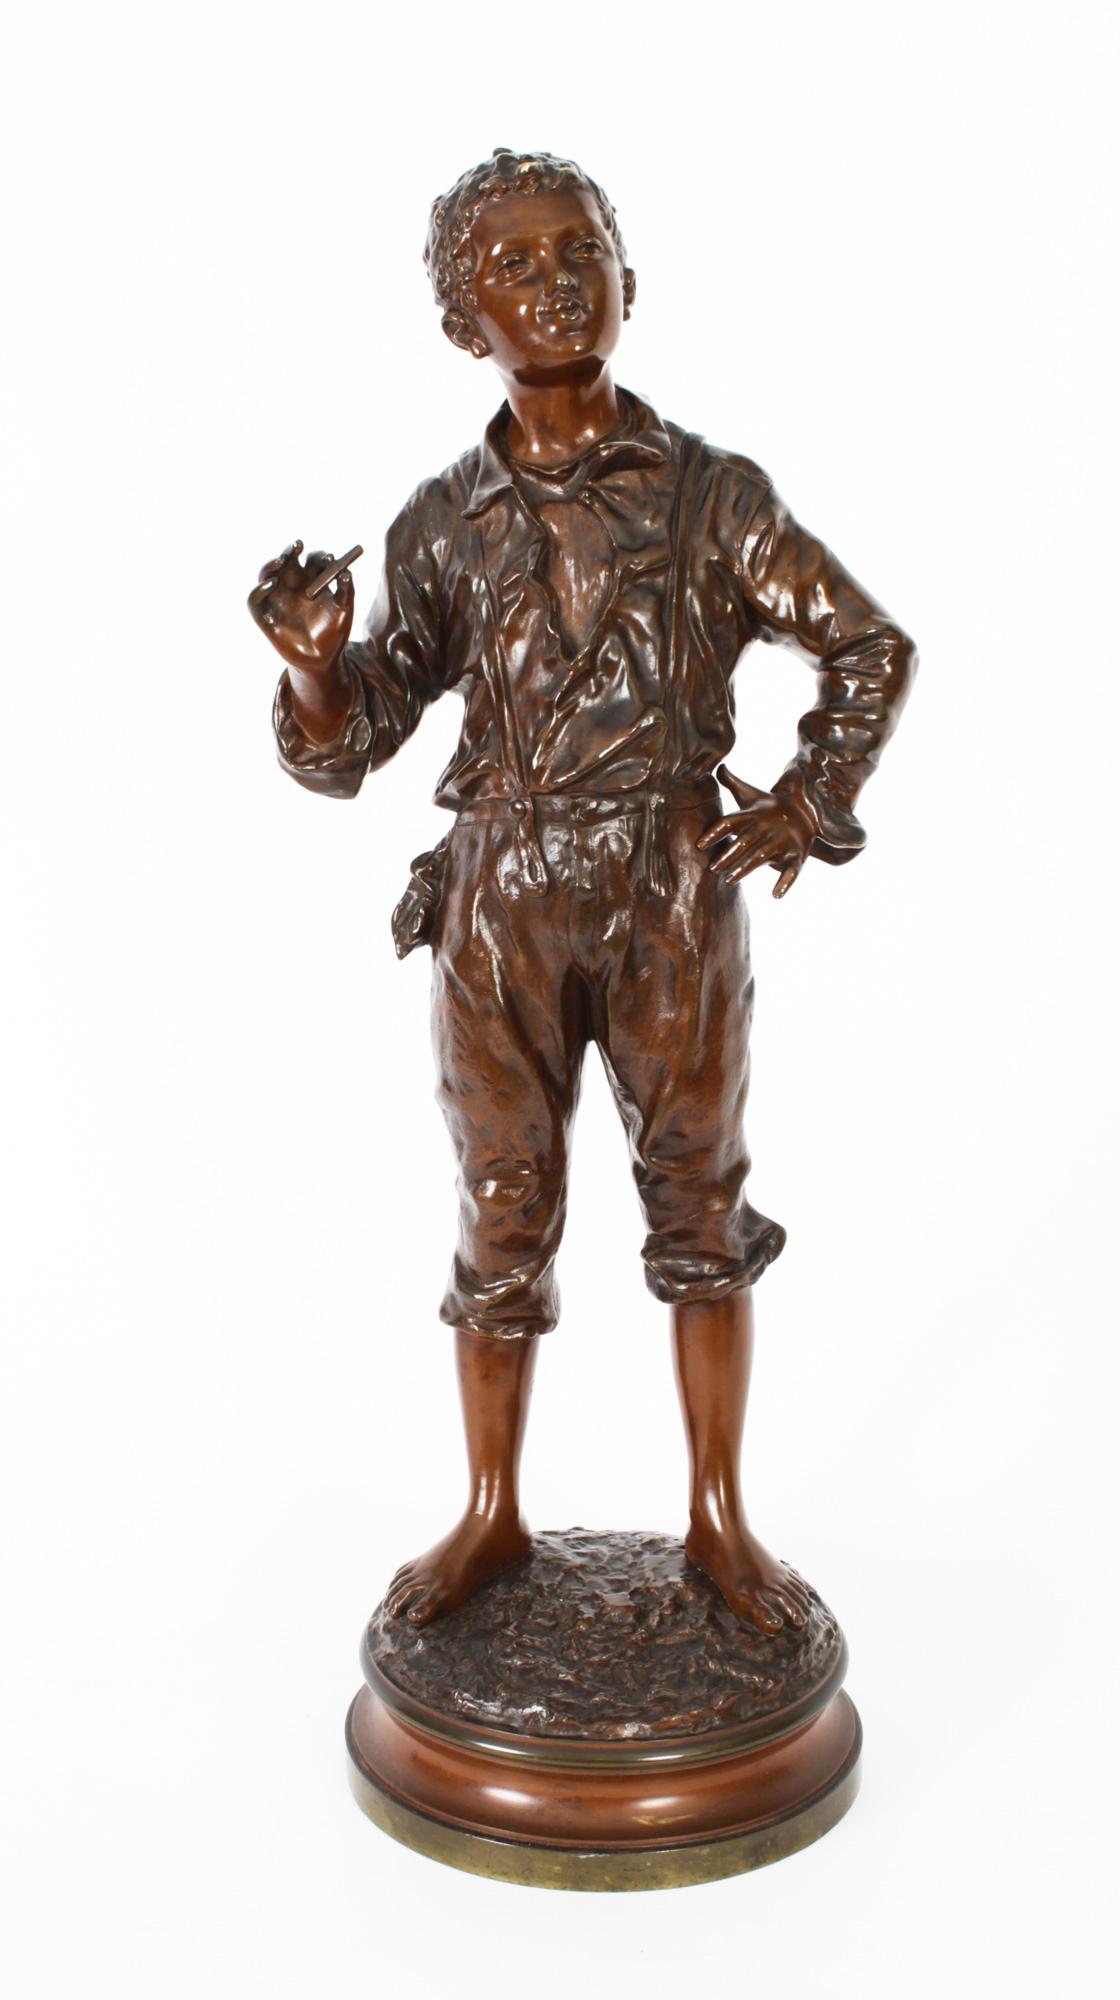 whistling boy statue value